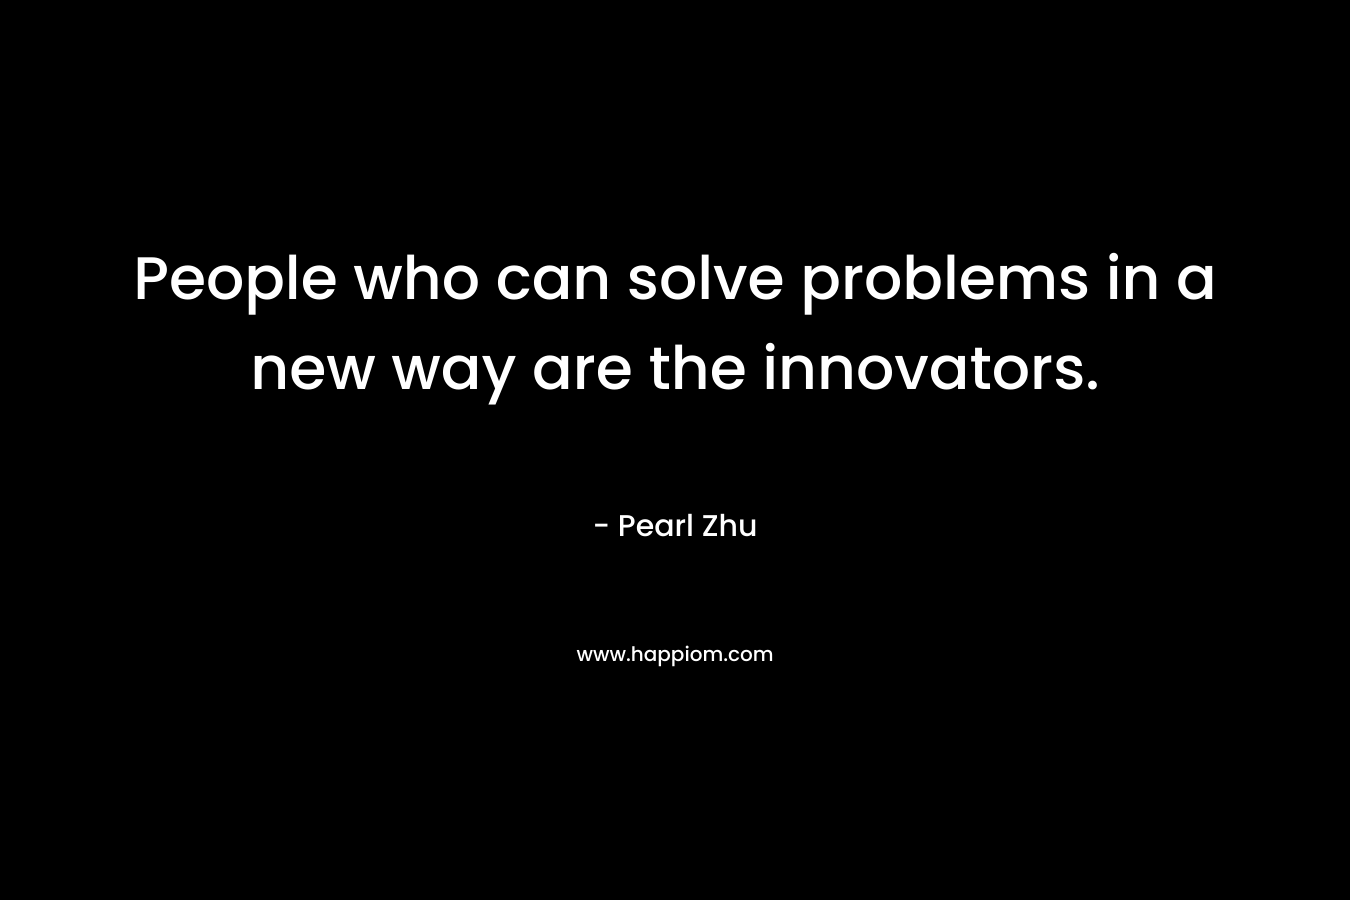 People who can solve problems in a new way are the innovators. – Pearl Zhu